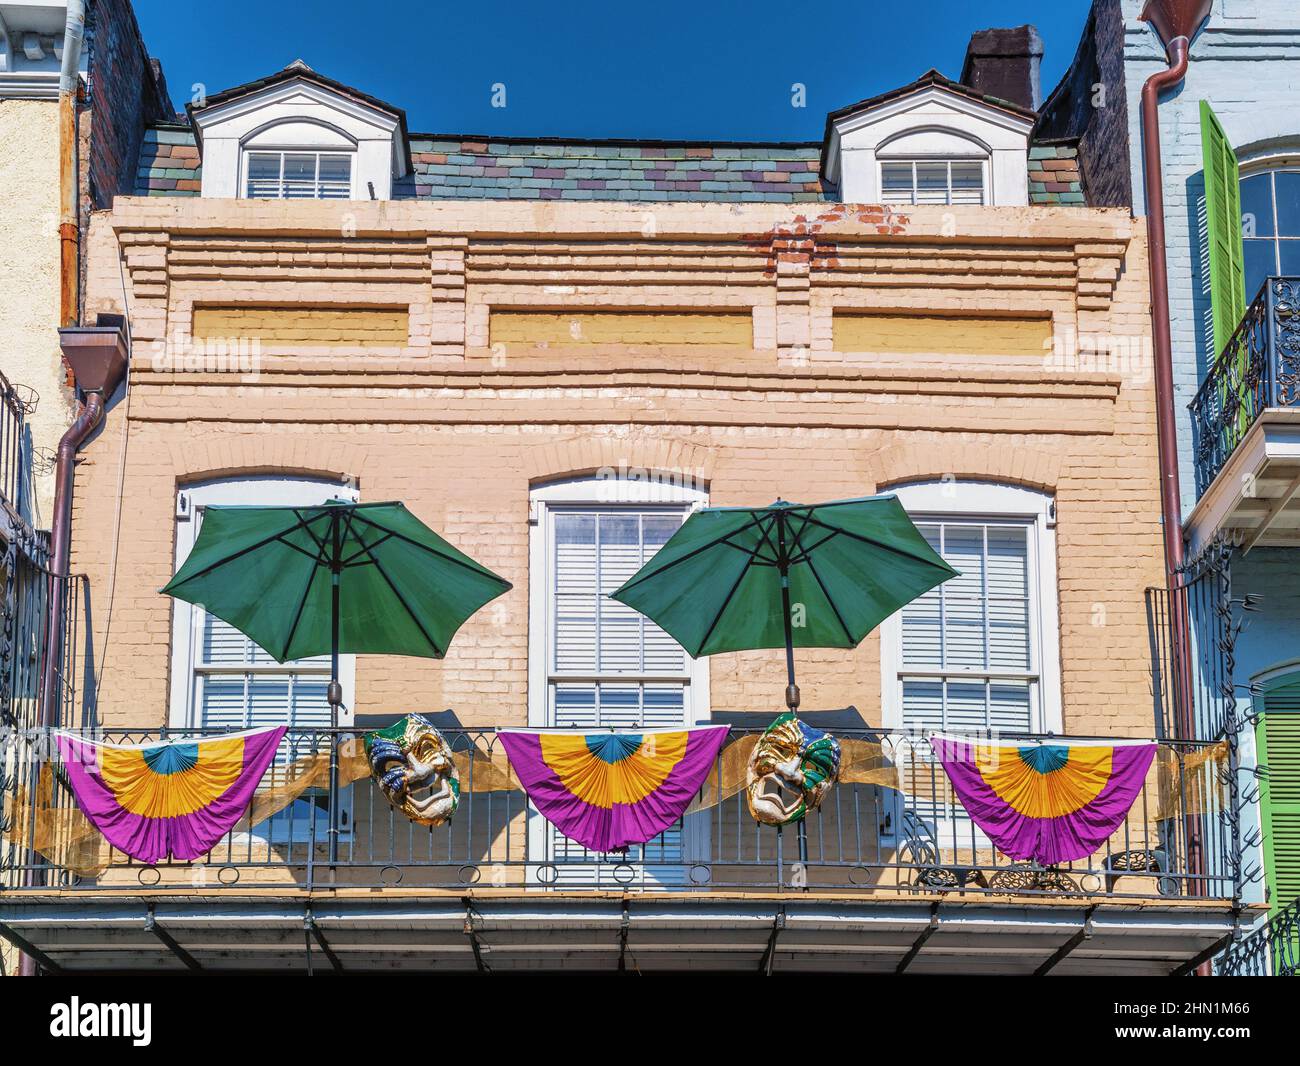 New Orleans French Quarter balcony during Mardi Gras, New Orleans, Louisiana, USA. Stock Photo